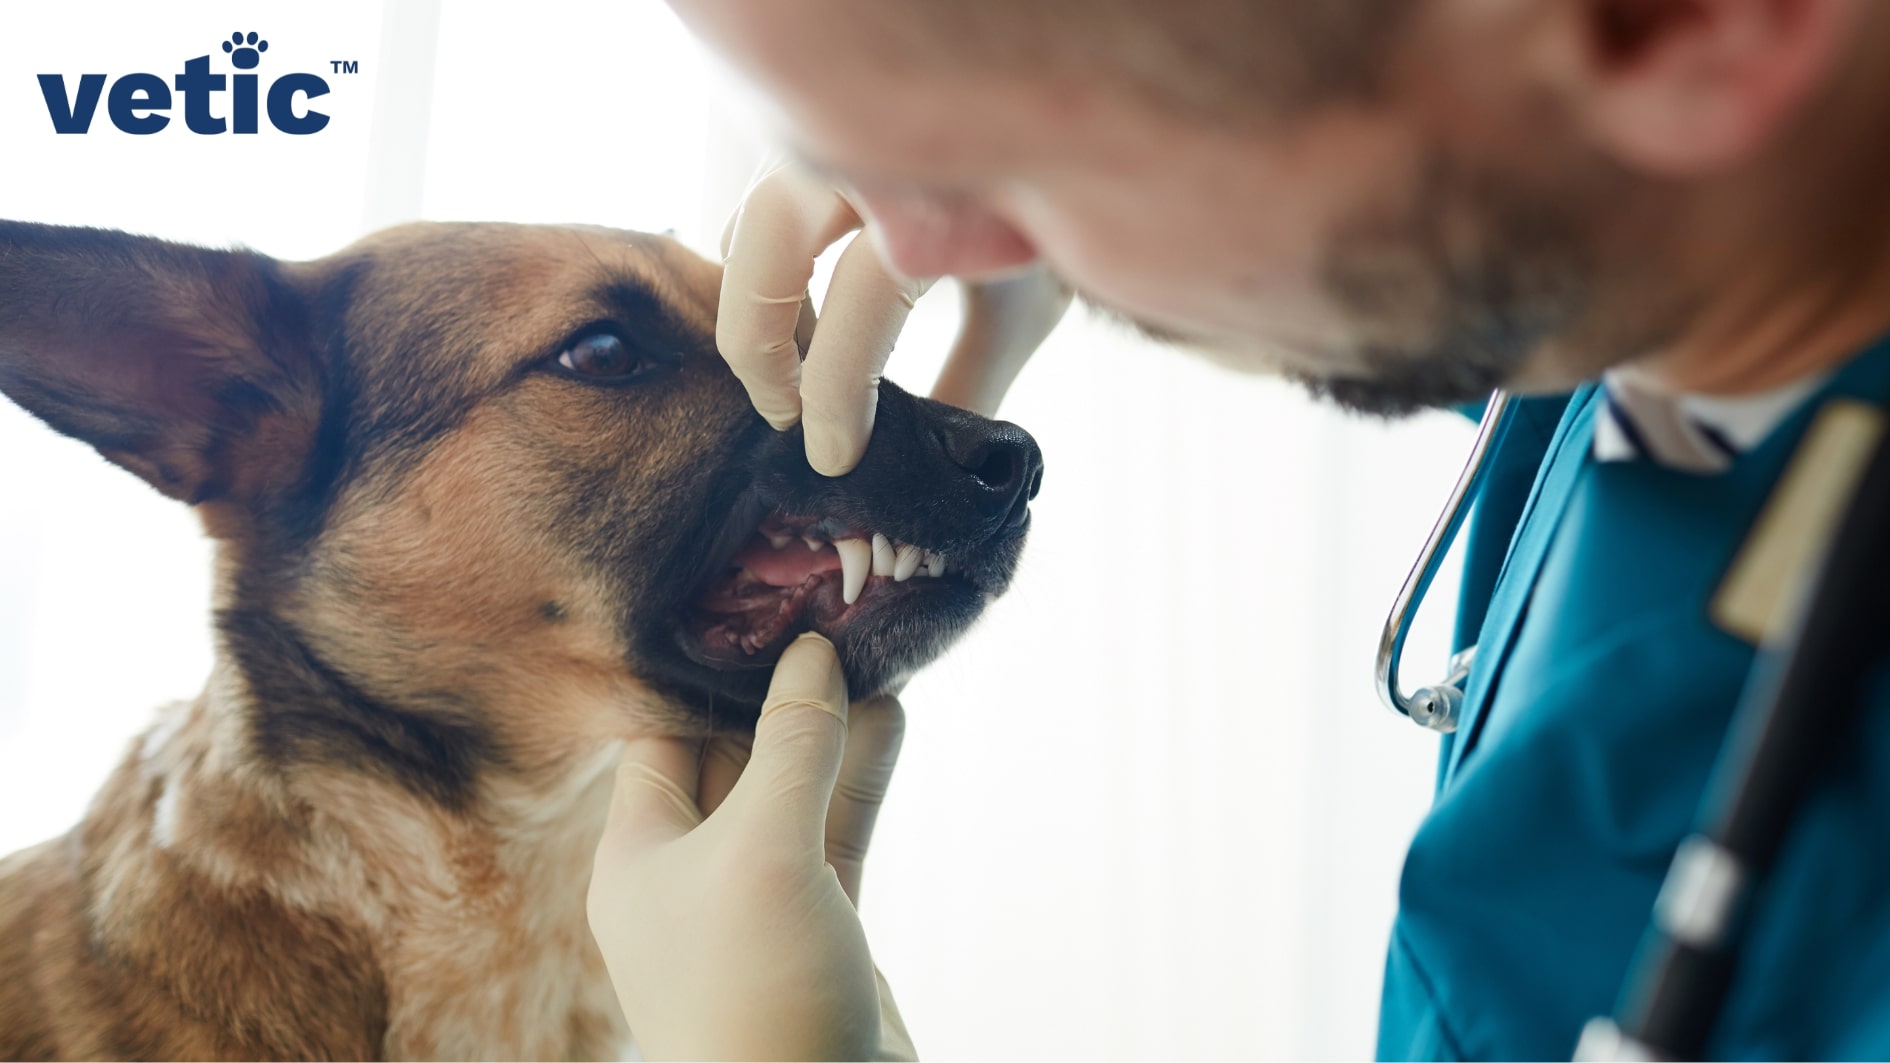 A veterinarian wearing blue scrubs and white gloves checking the dental condition of a relatively young dog of unknown breed. The photo is taken from above the shoulder of the vet. Poor dental health can be a cause of excessive drooling in dogs